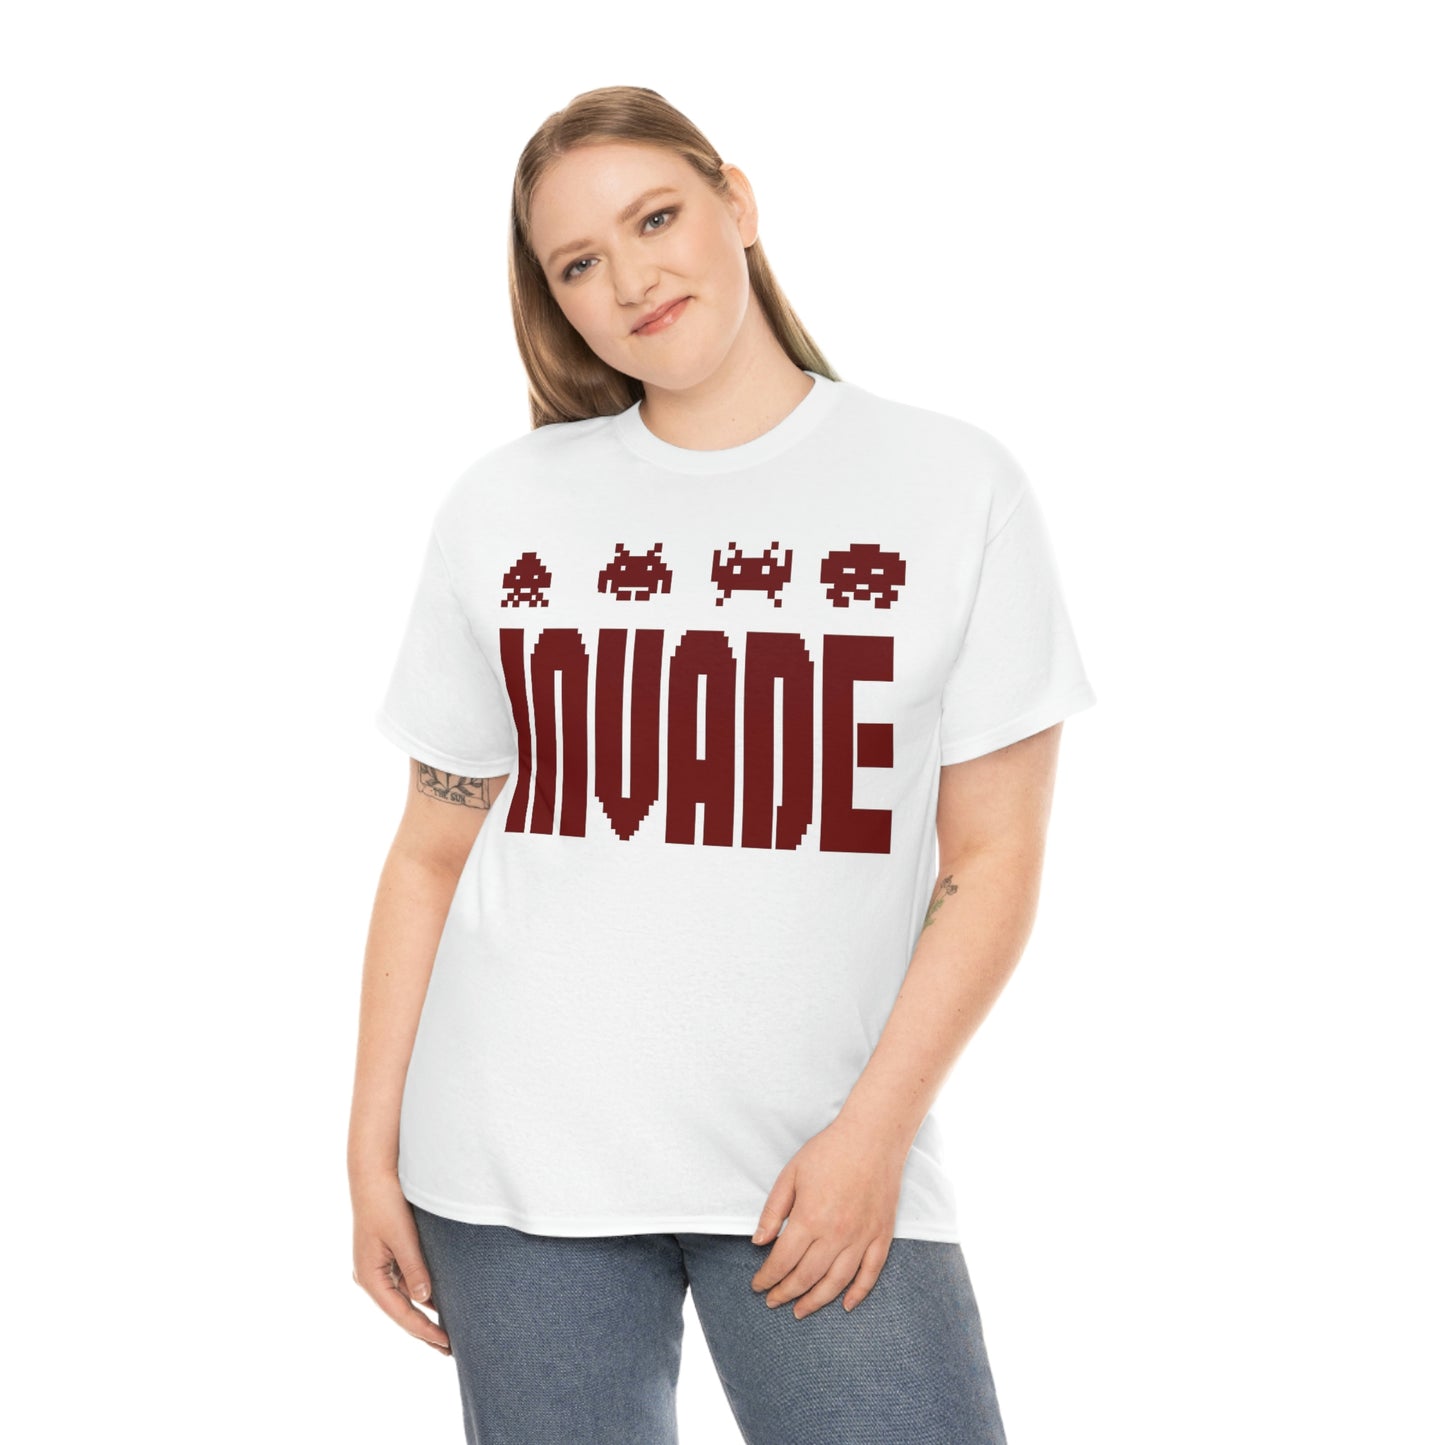 Space Invaders Men's Tee - Invasion